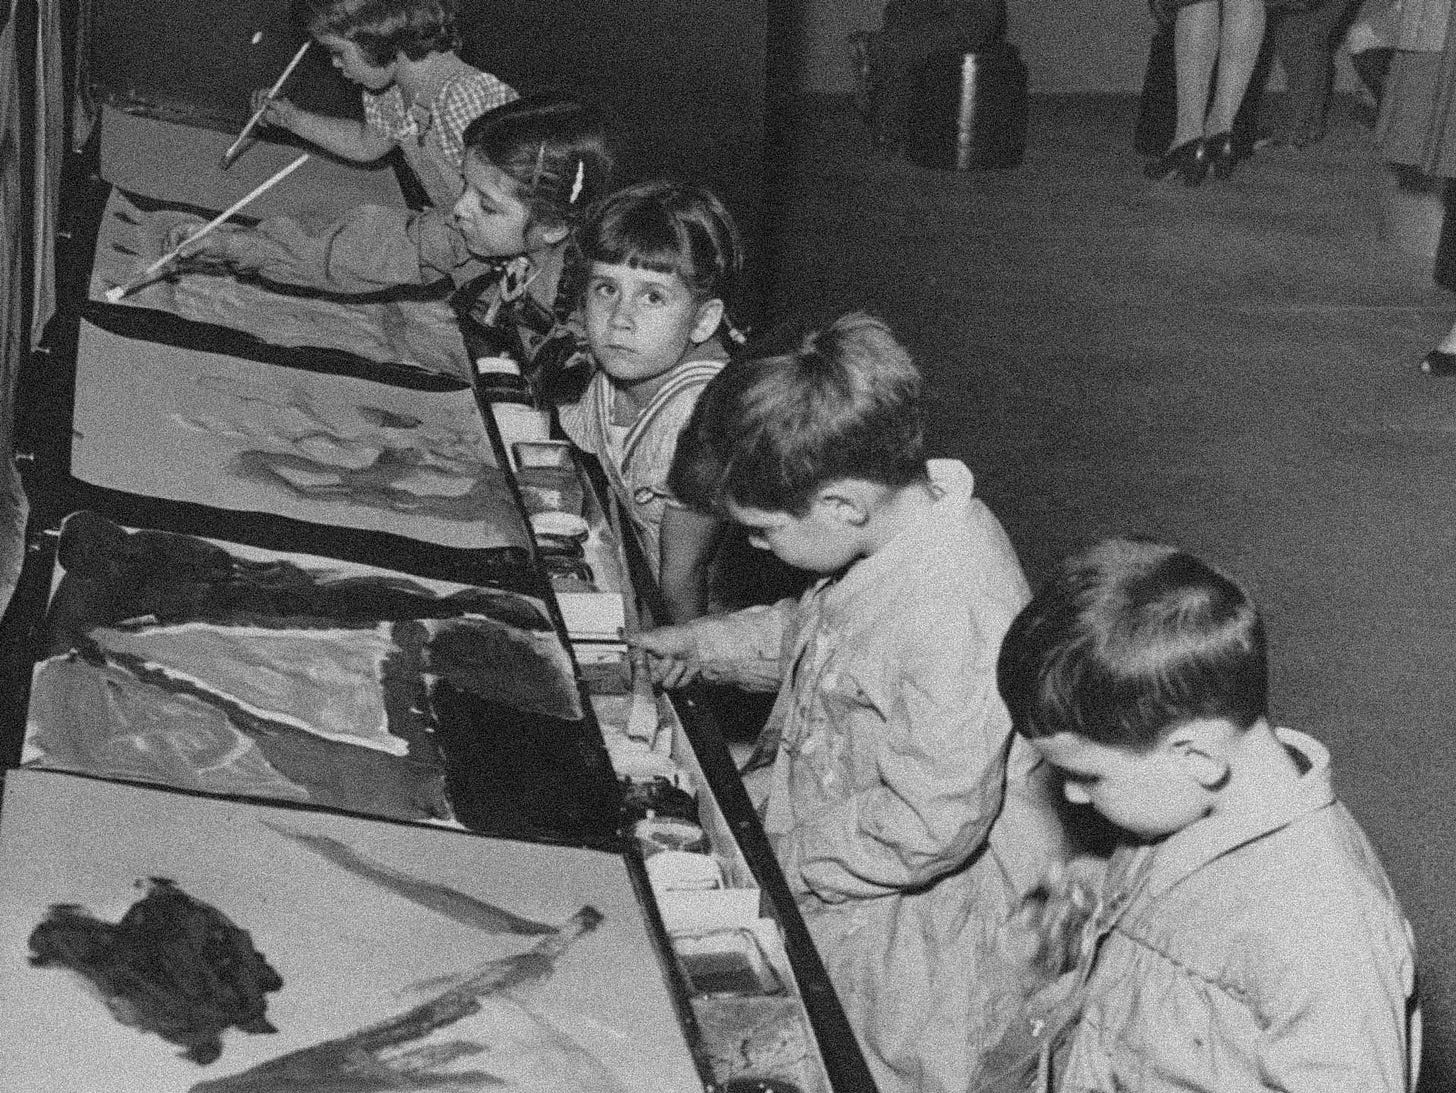 Children's art classes at MoMA. Source - MoMA Exhibition history https://www.moma.org/calendar/exhibitions/history/